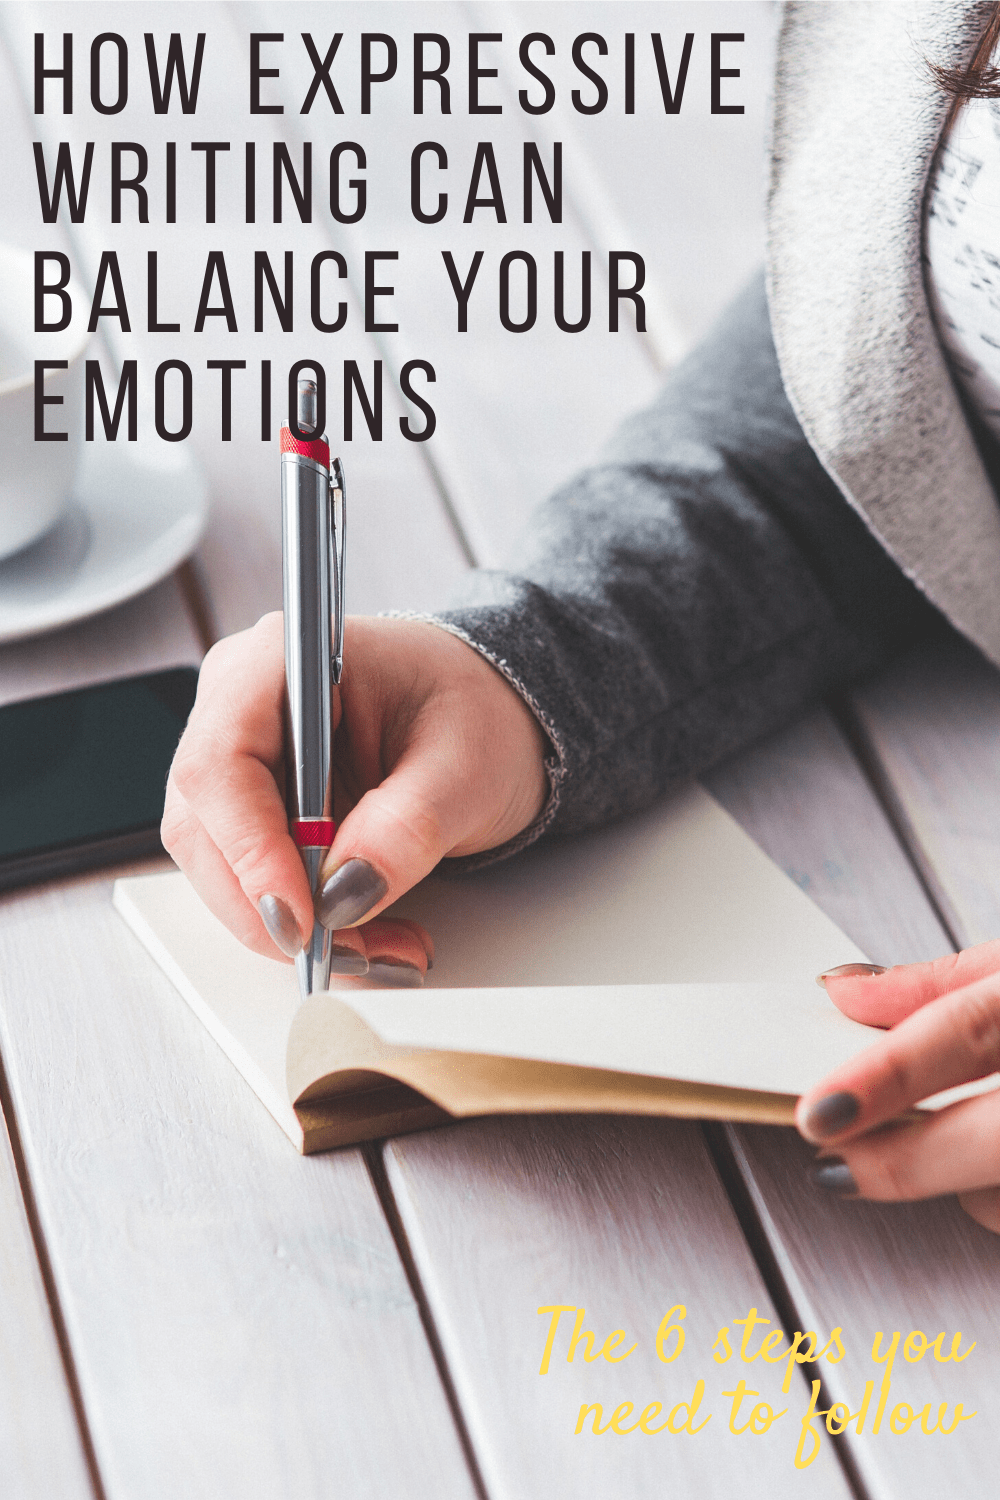 Find out how you can achieve a sense of balance with an expressive writing through pain exercise in your mental health journal